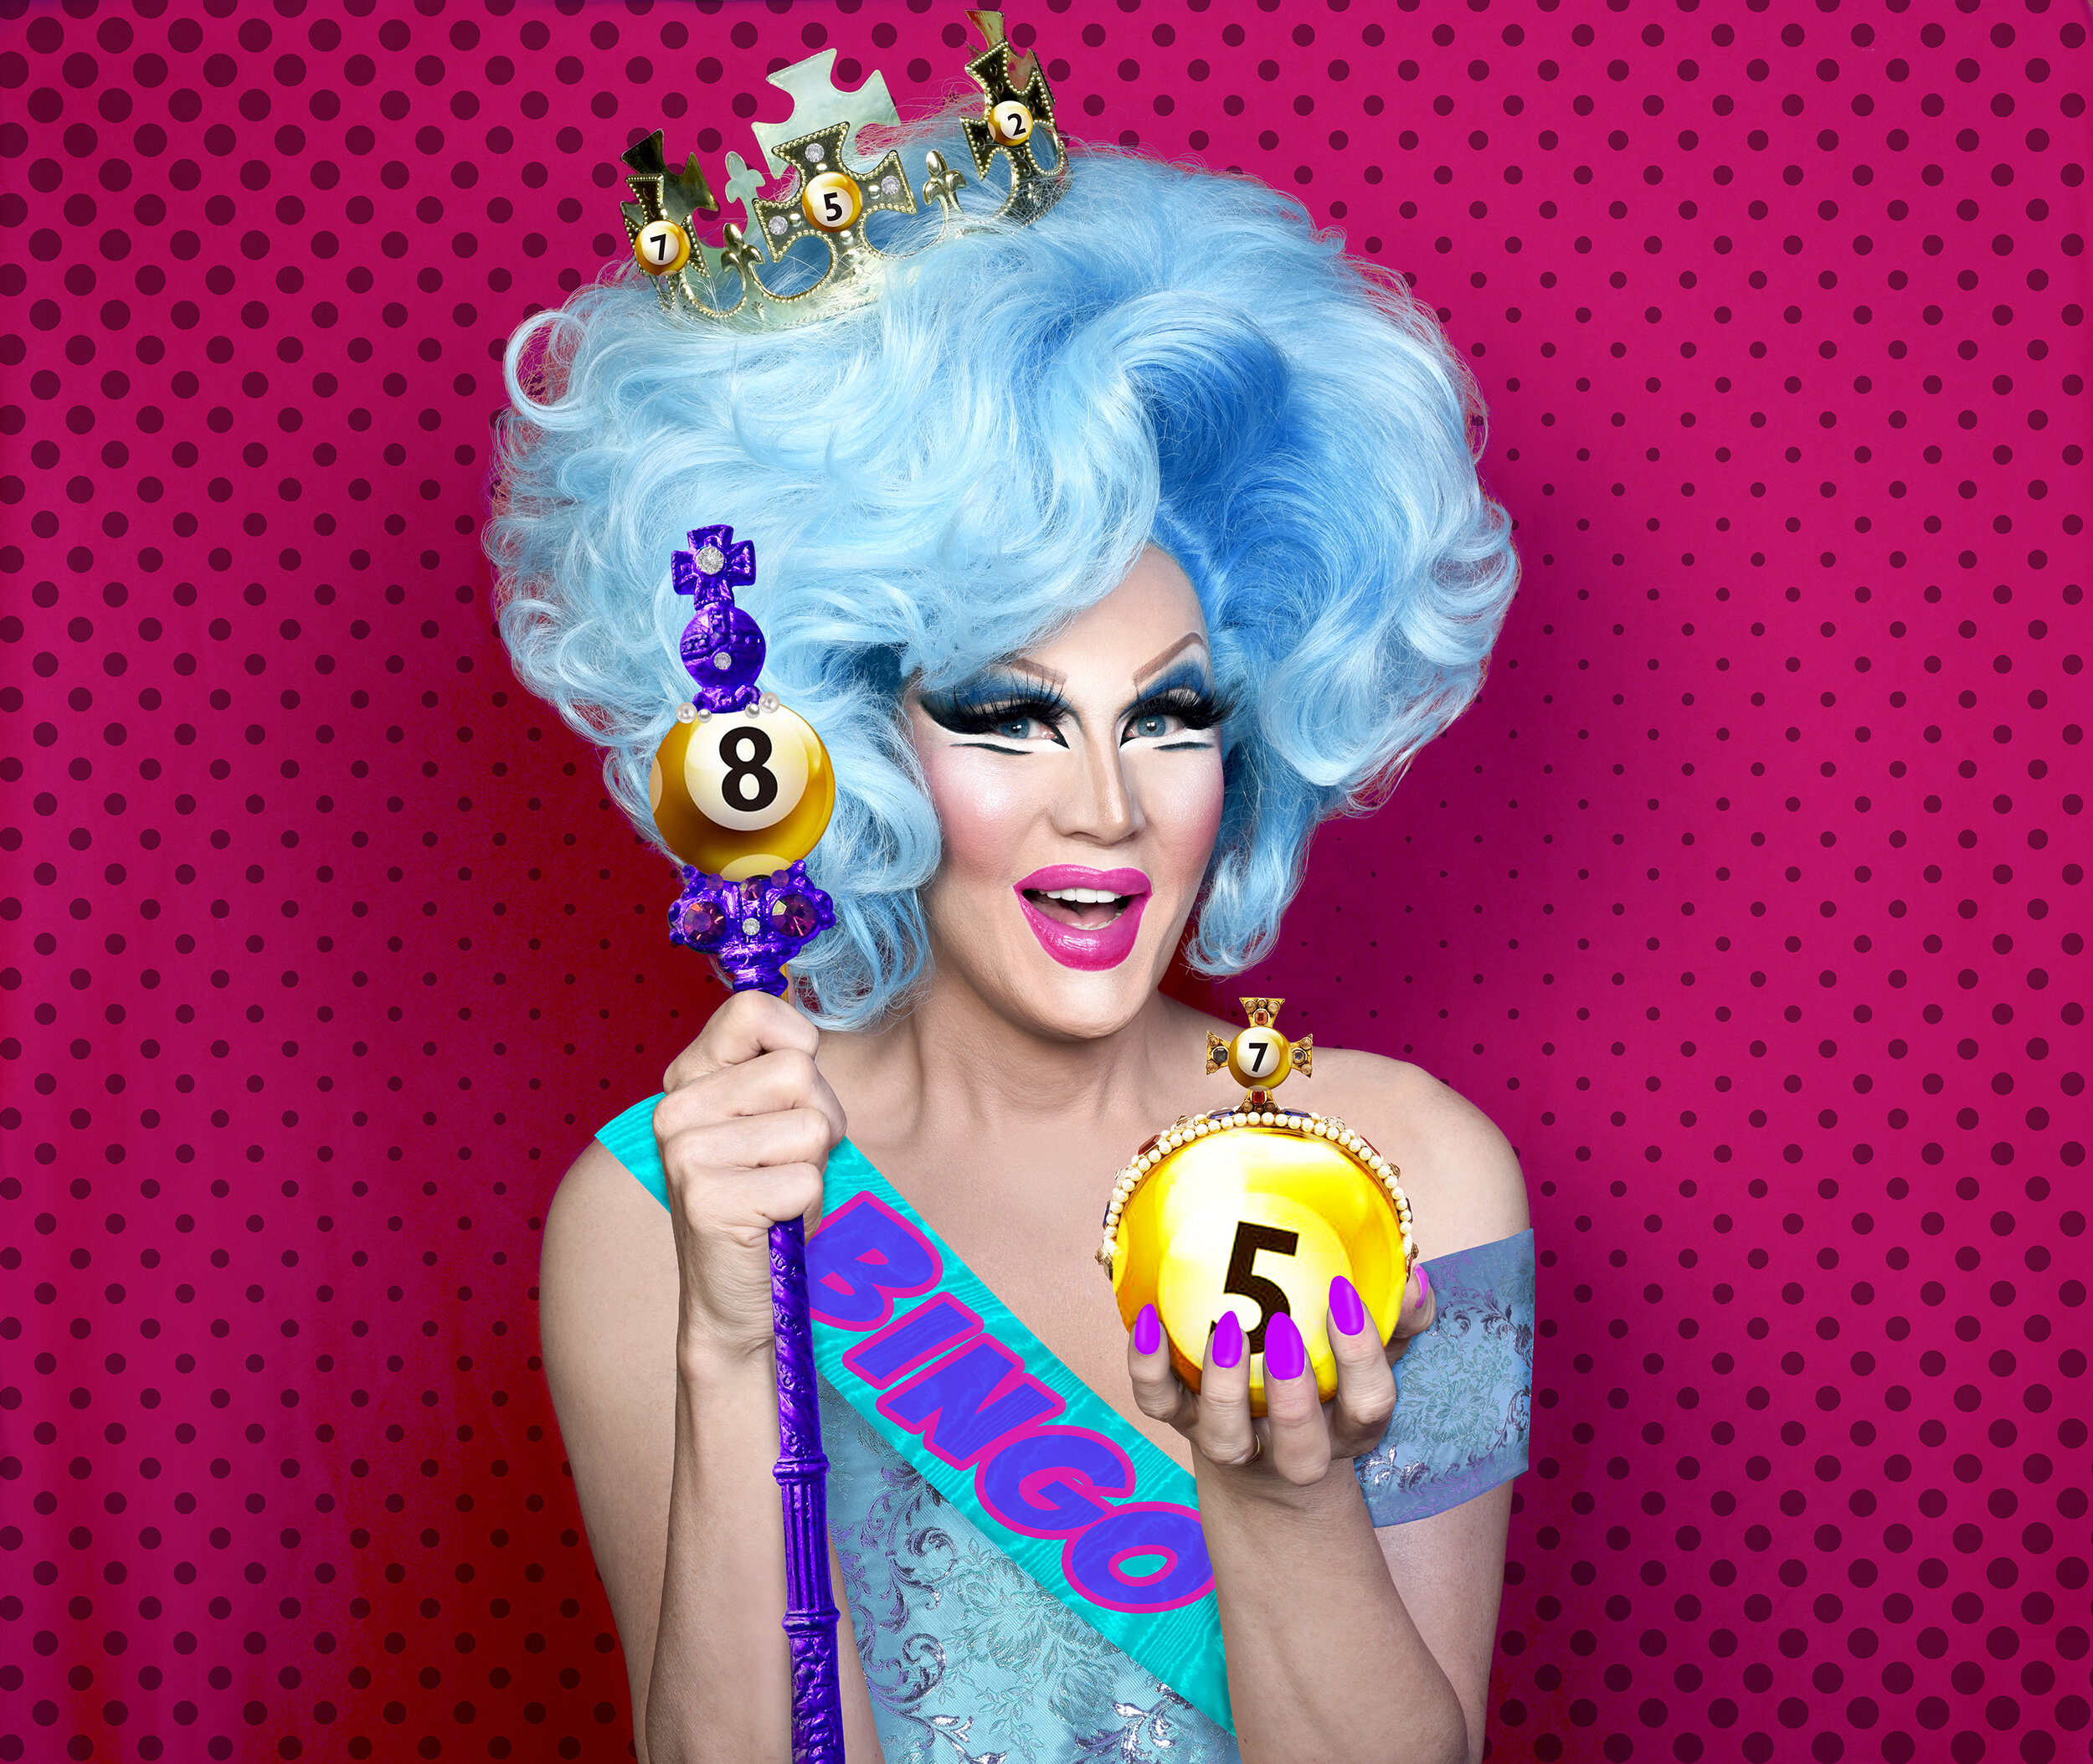 a drag queen with blue curly hair wearing a sash saying "bingo"